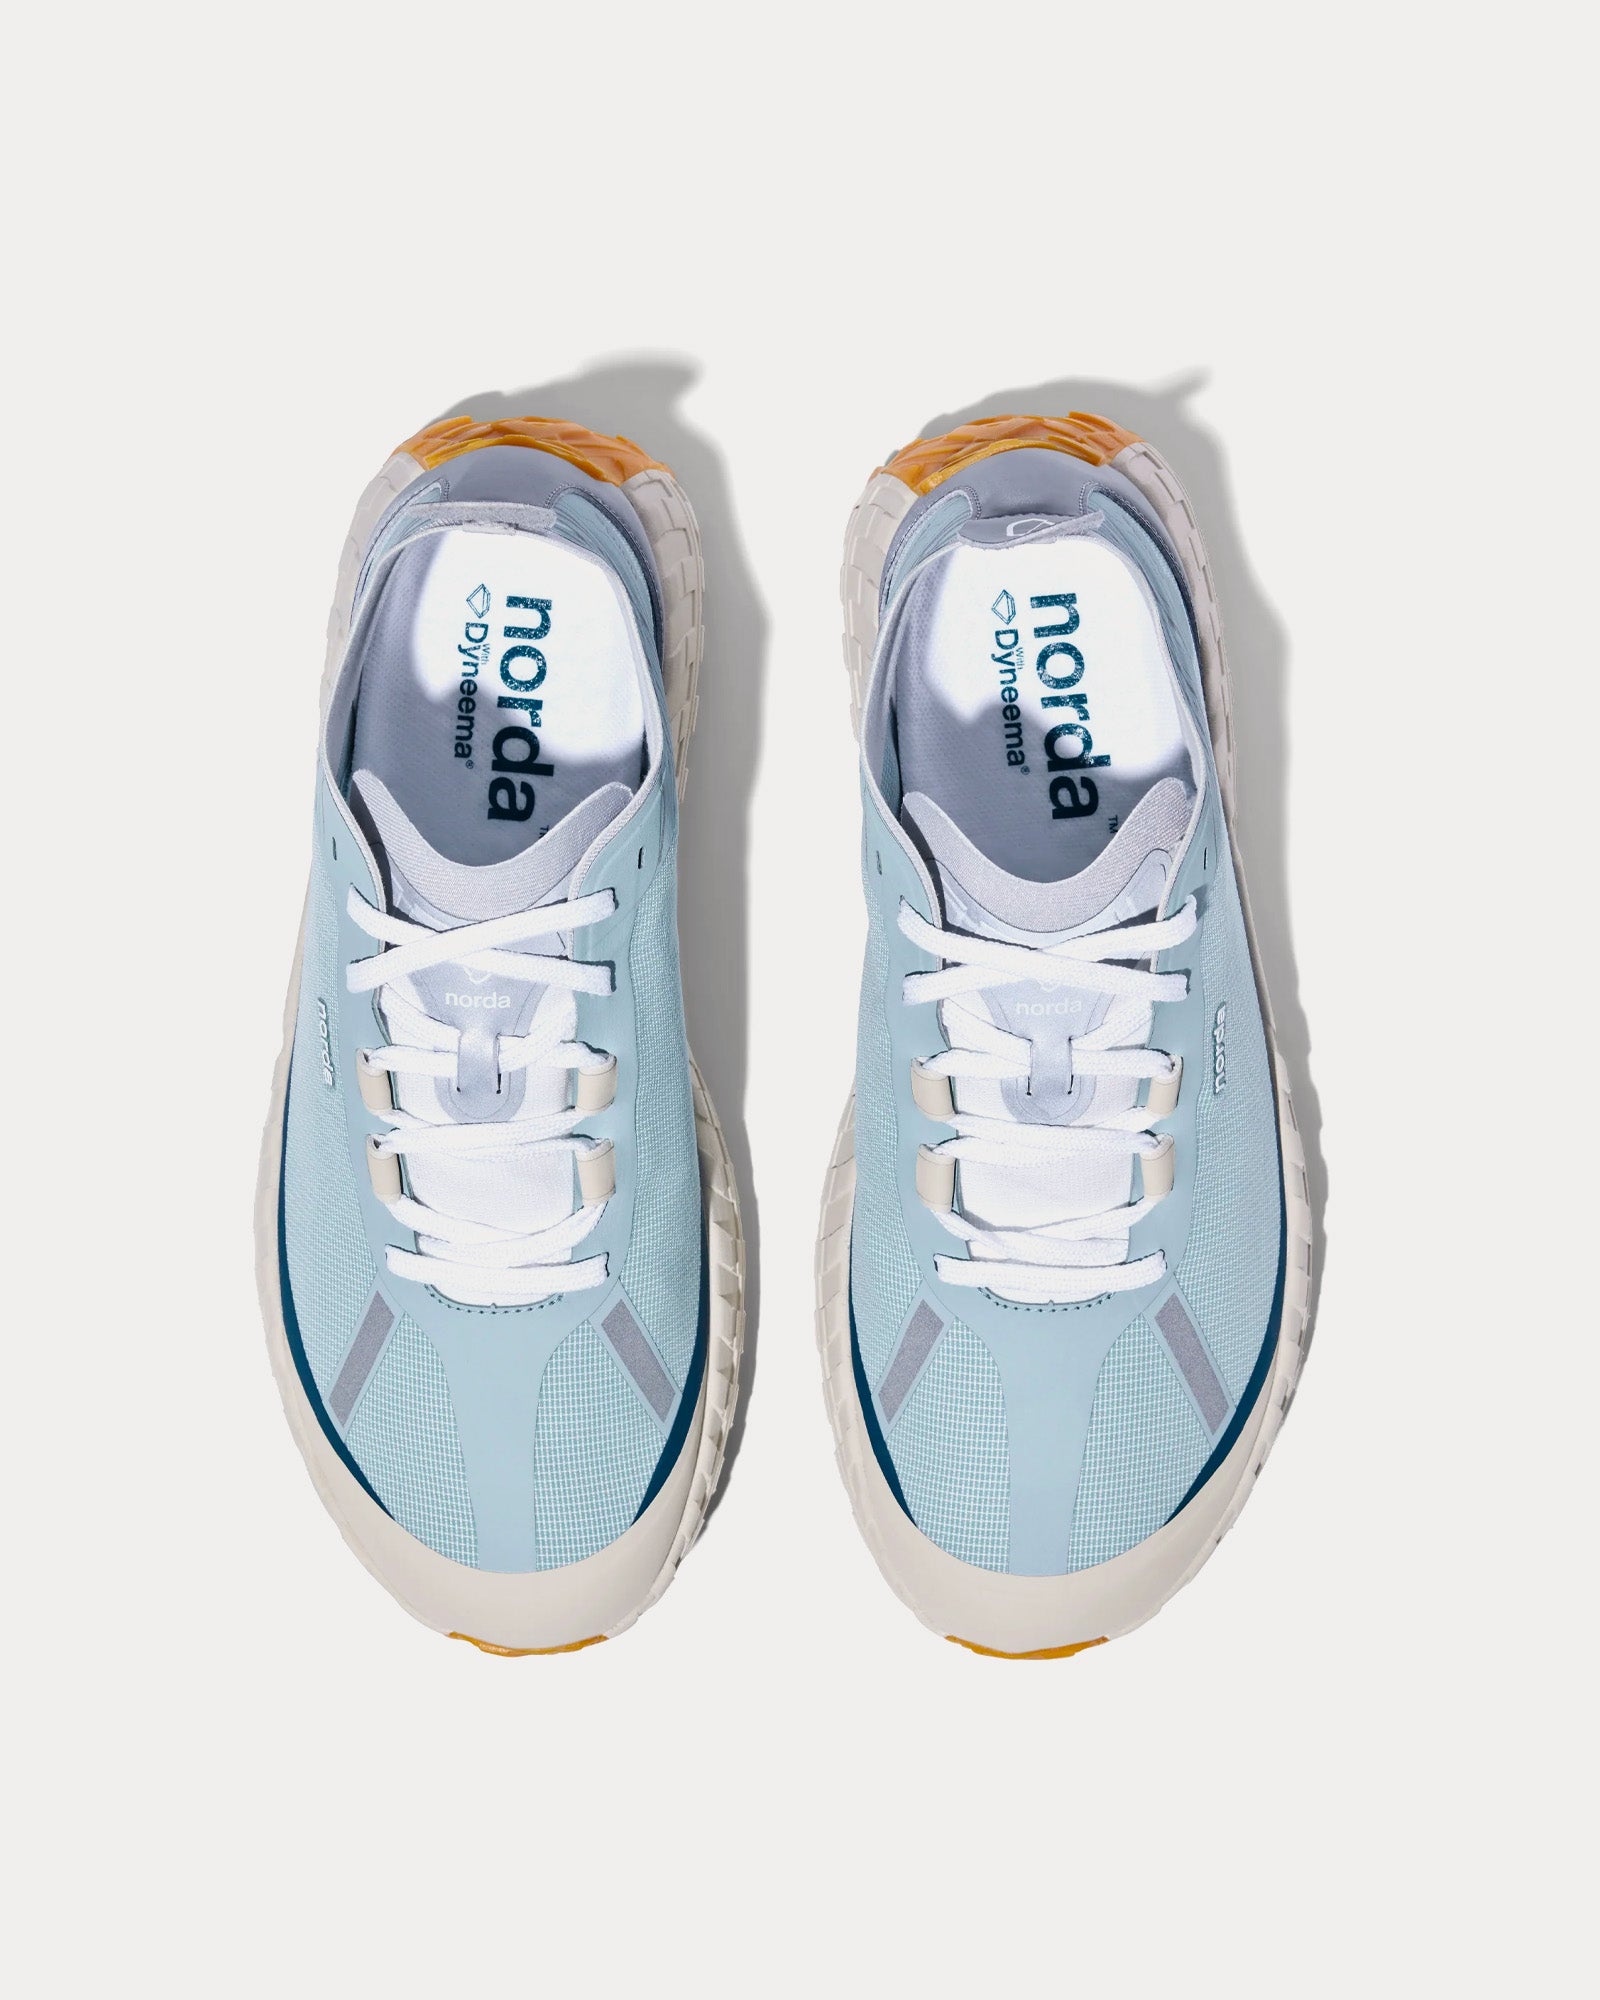 Norda - 001 W Ether Running Shoes